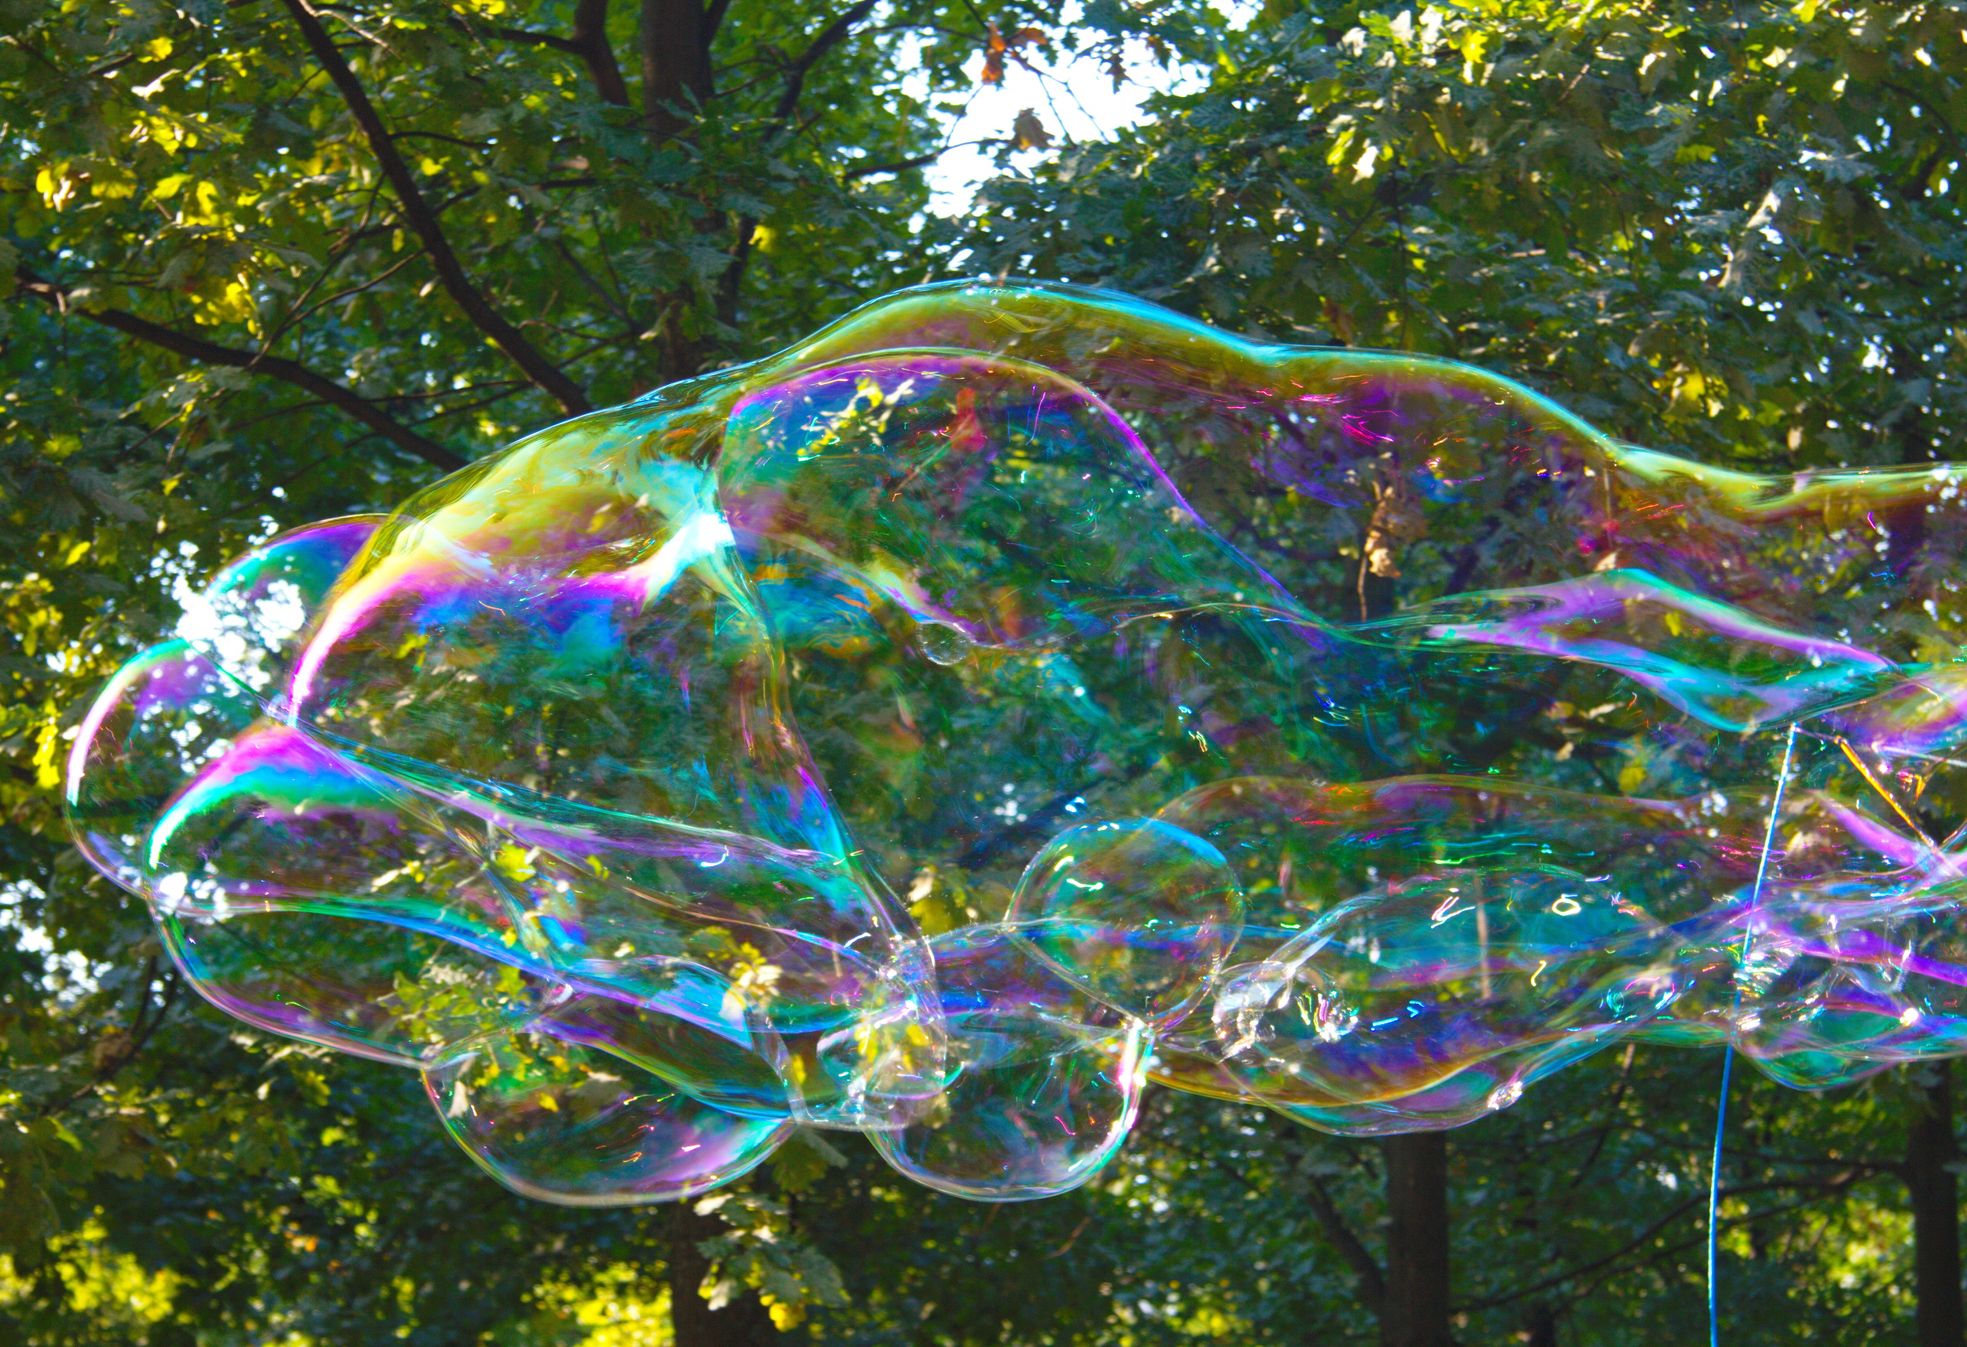 Physics of Giant Soap Bubbles